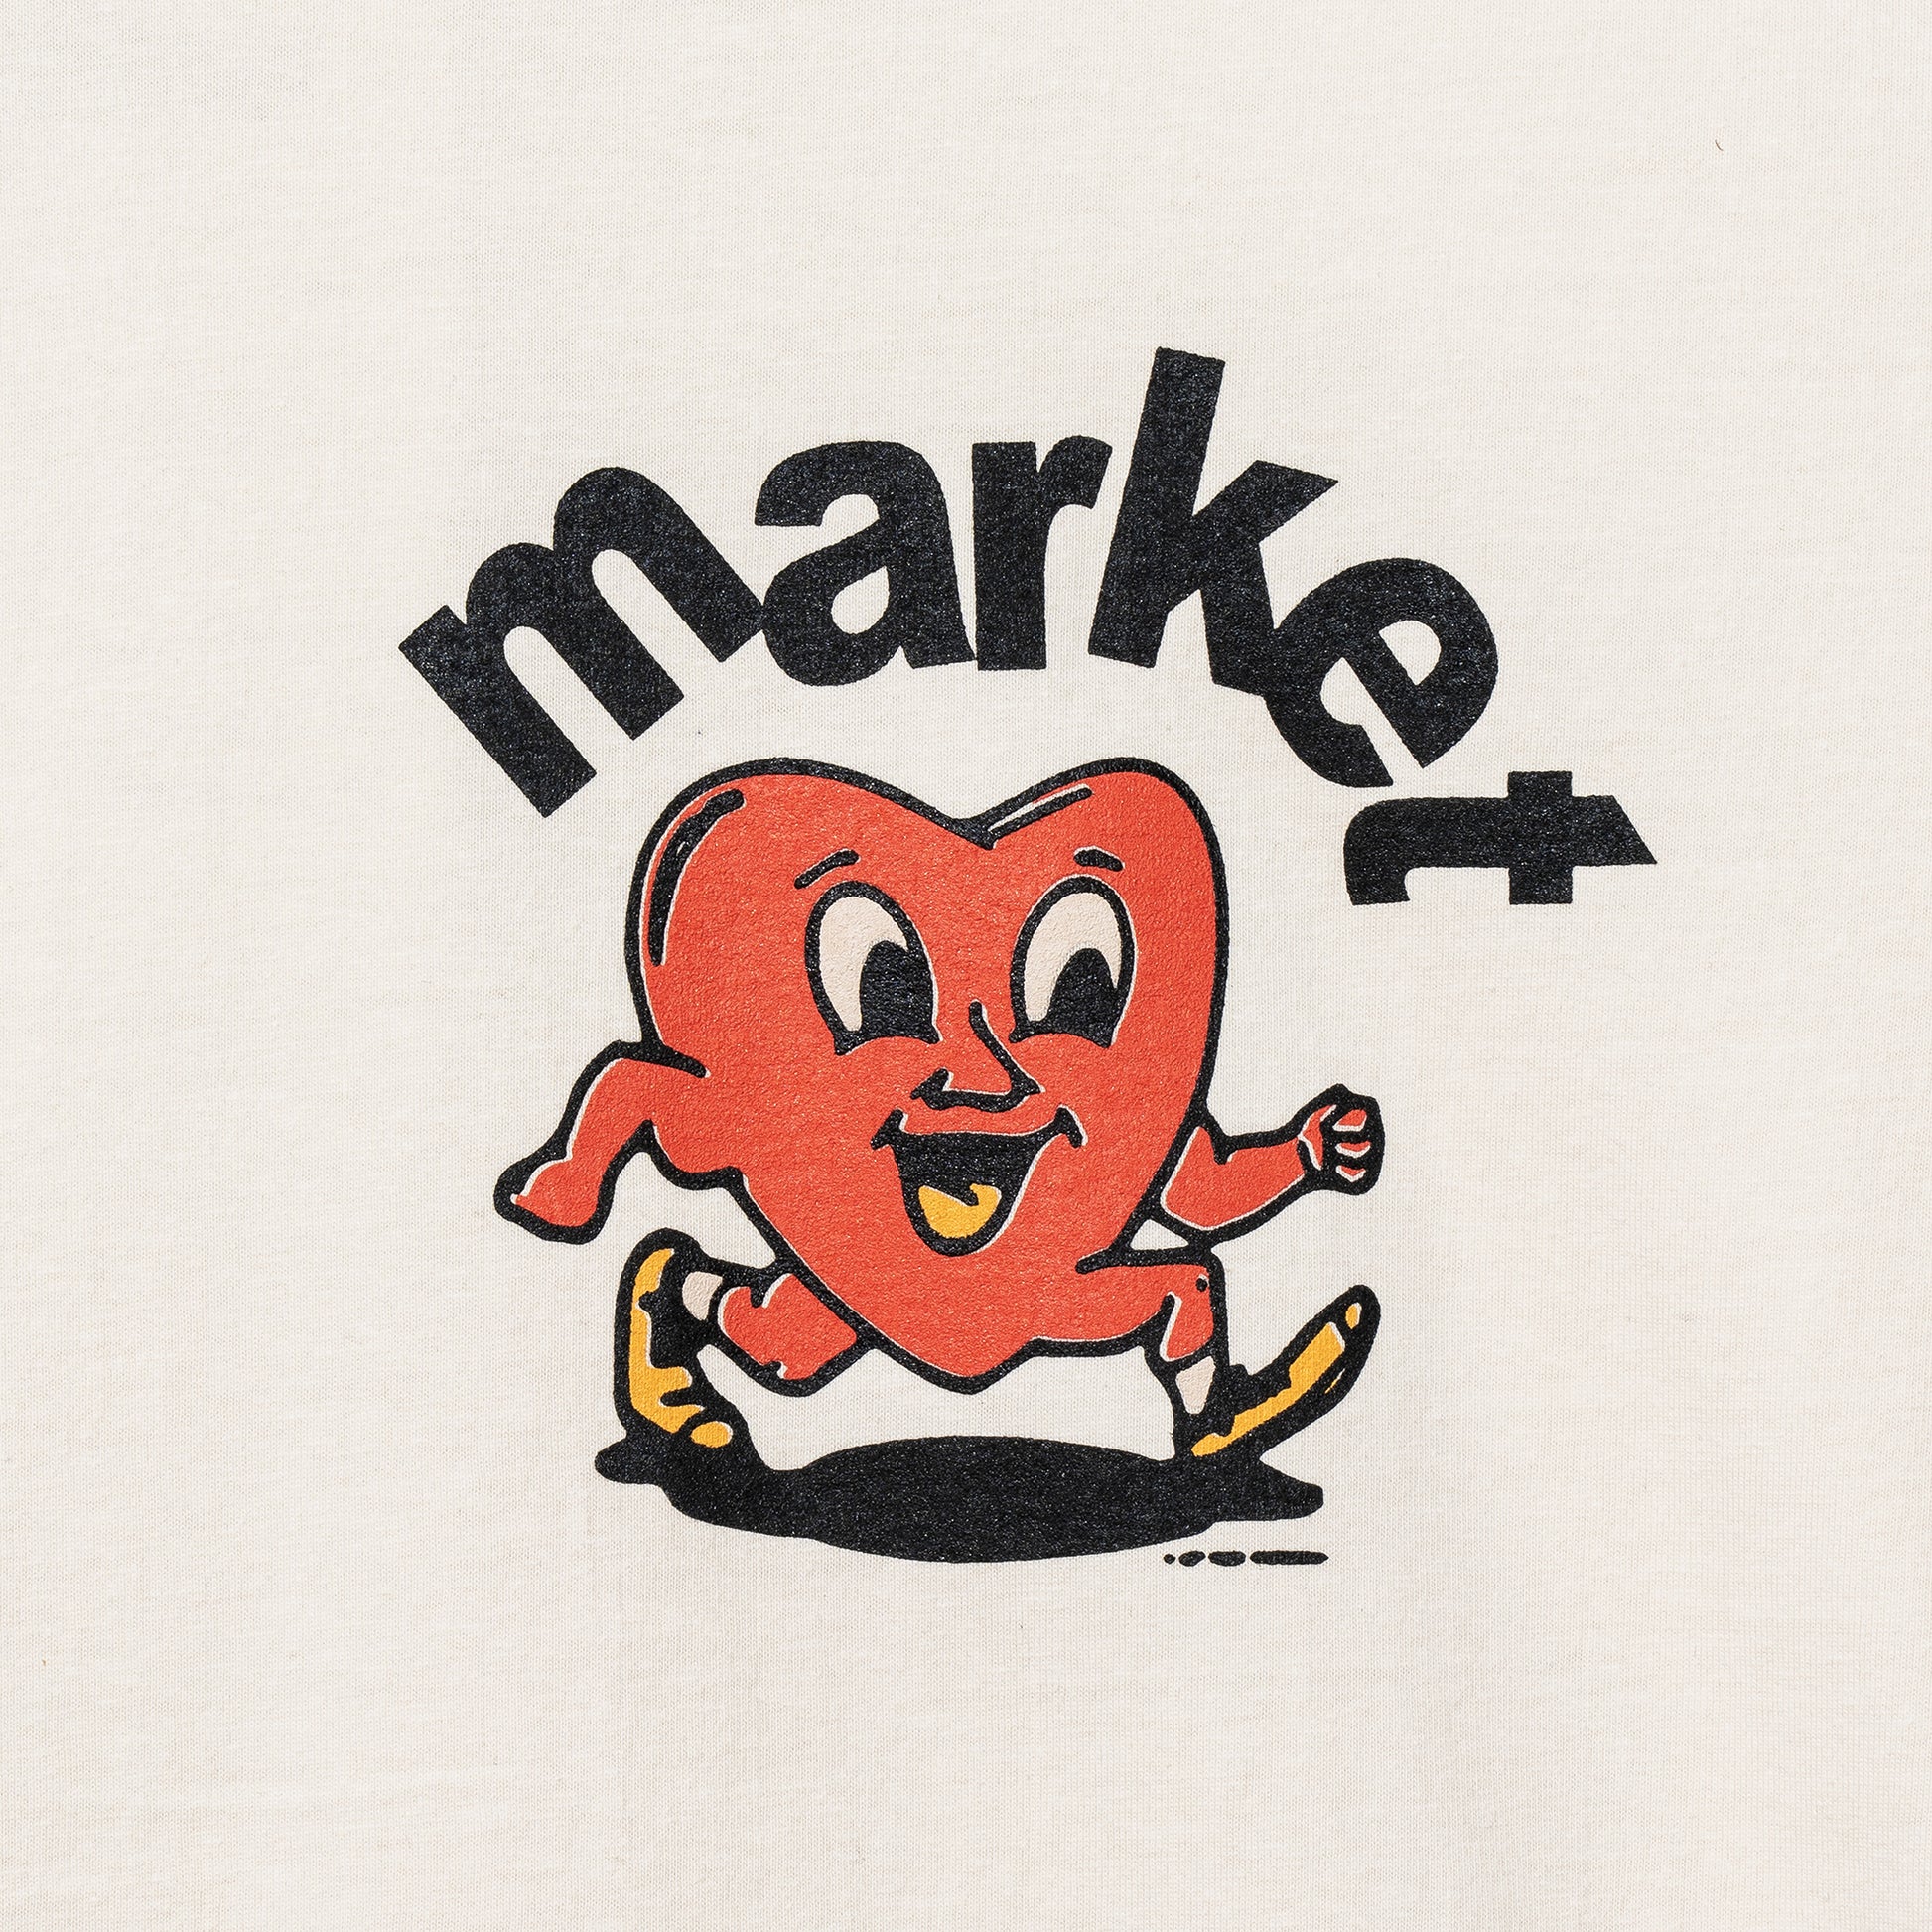 MARKET clothing brand FRAGILE T-SHIRT. Find more graphic tees, hats, hoodies and more at MarketStudios.com. Formally Chinatown Market.